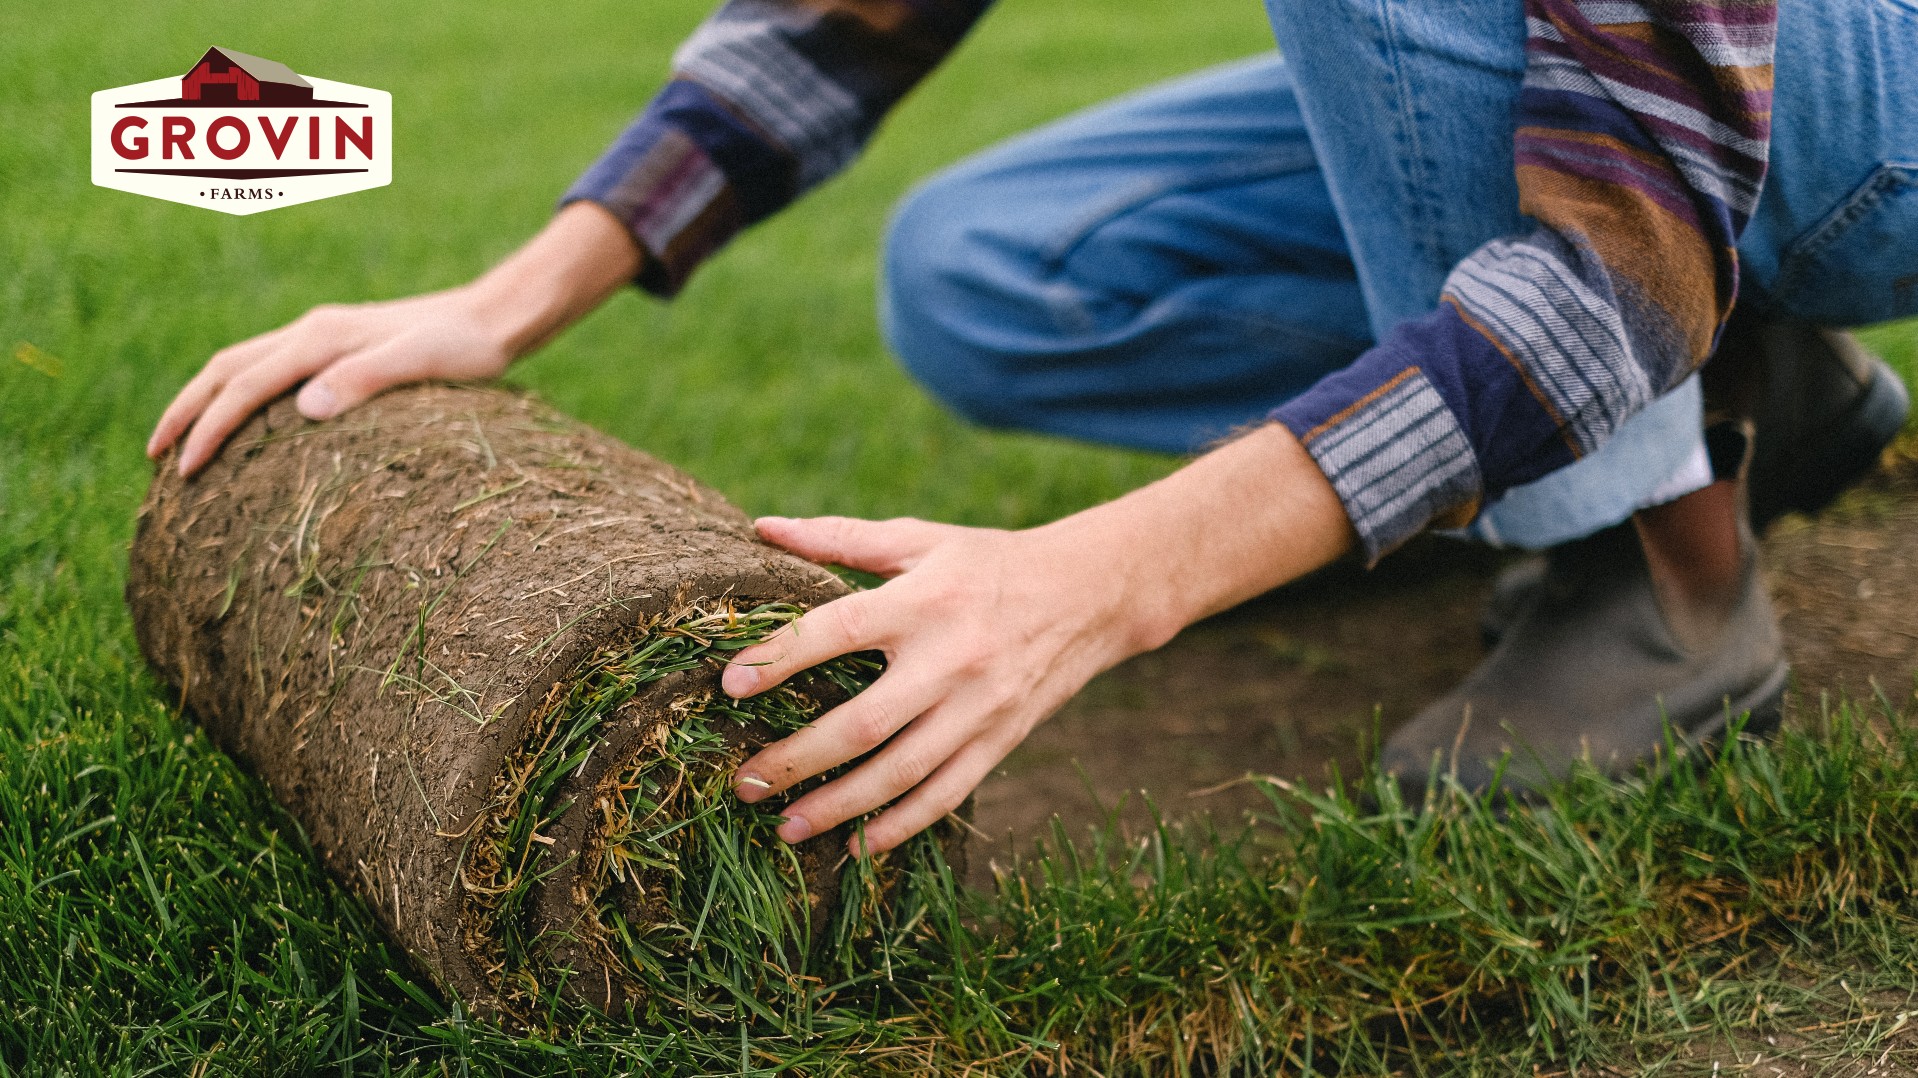 How to choose the right sod for your lawn